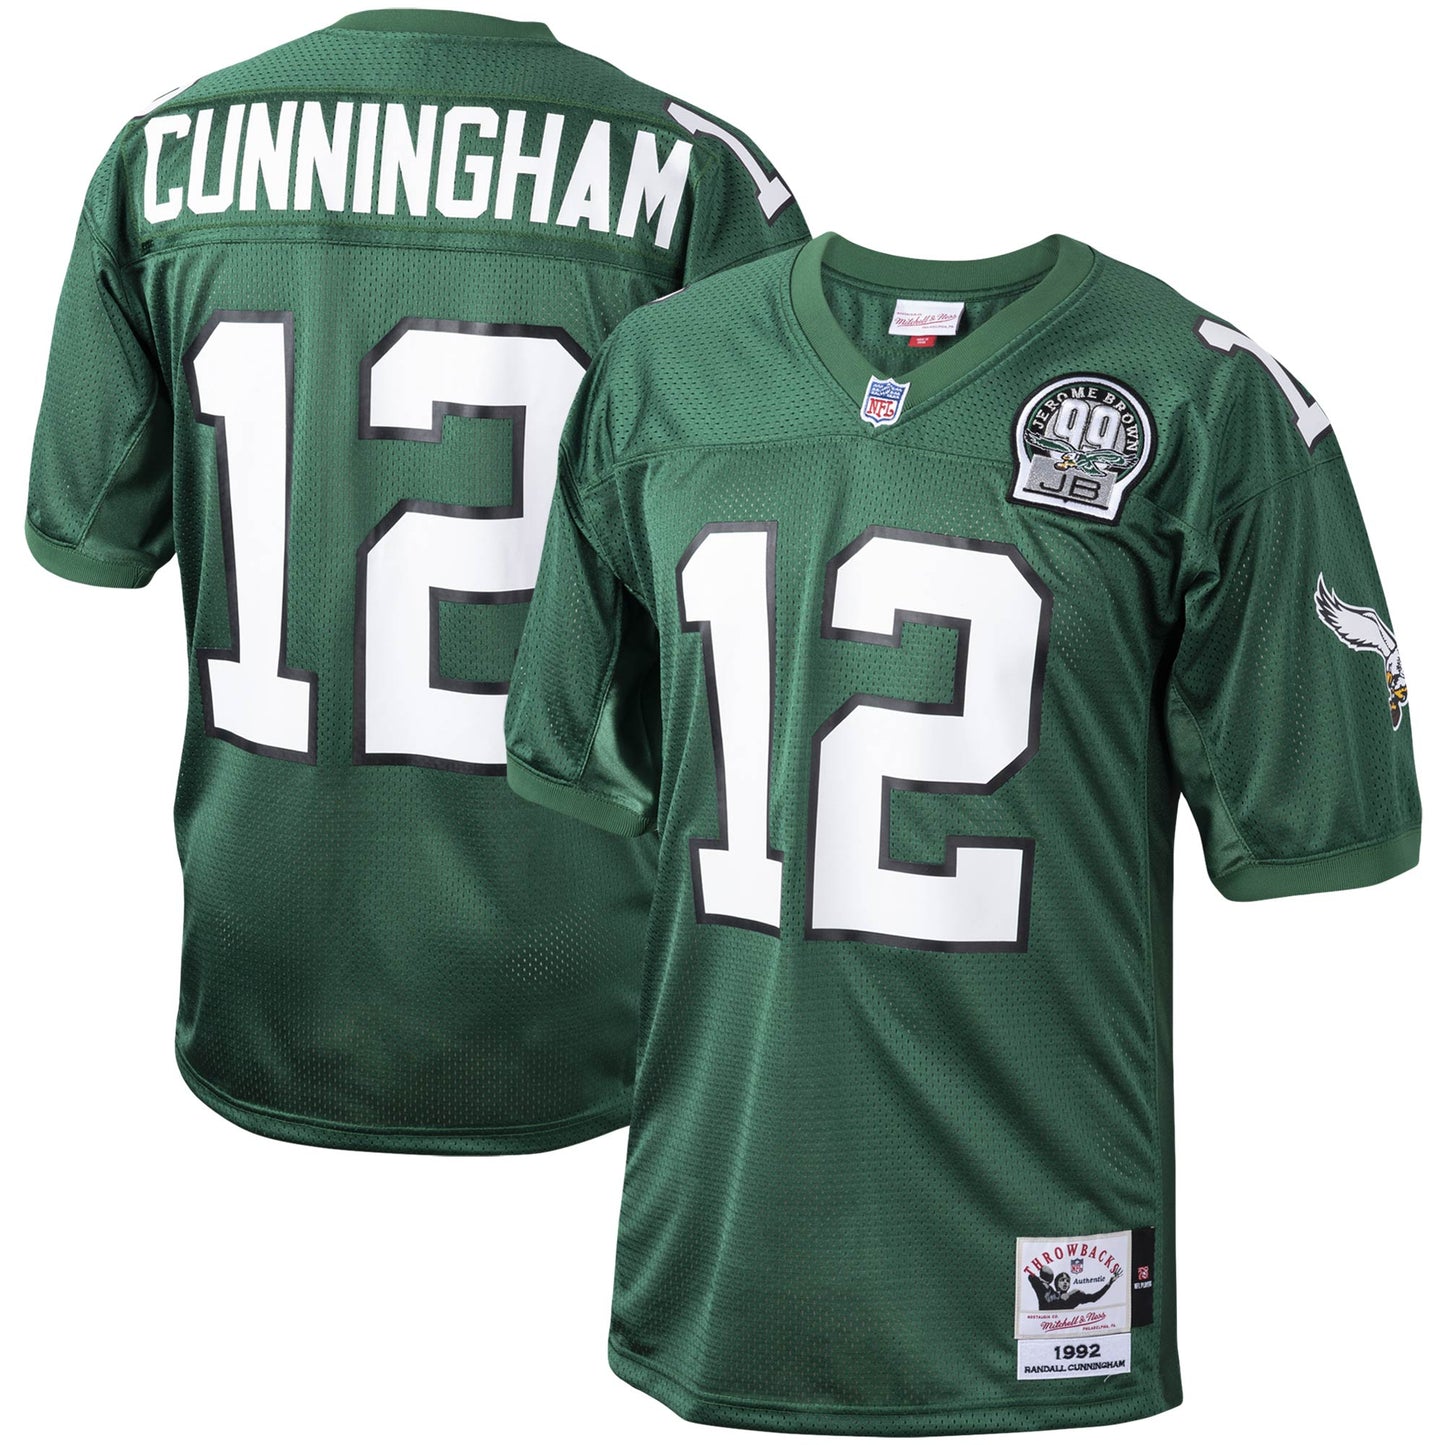 Randall Cunningham Philadelphia Eagles Mitchell & Ness 1992 Authentic Throwback Retired Player Jersey - Kelly Green